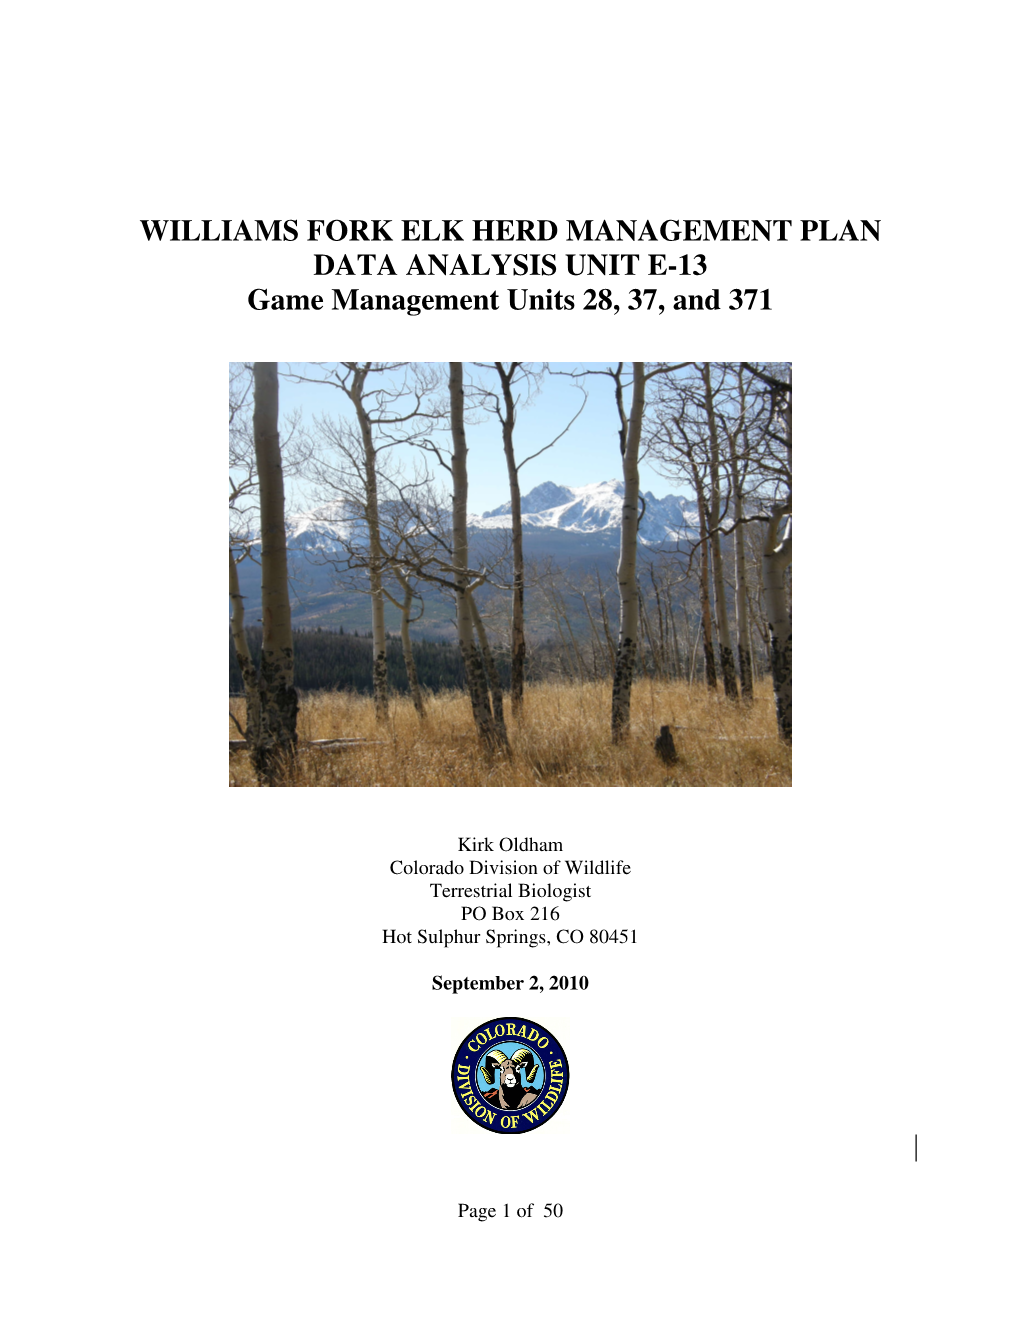 WILLIAMS FORK ELK HERD MANAGEMENT PLAN DATA ANALYSIS UNIT E-13 Game Management Units 28, 37, and 371